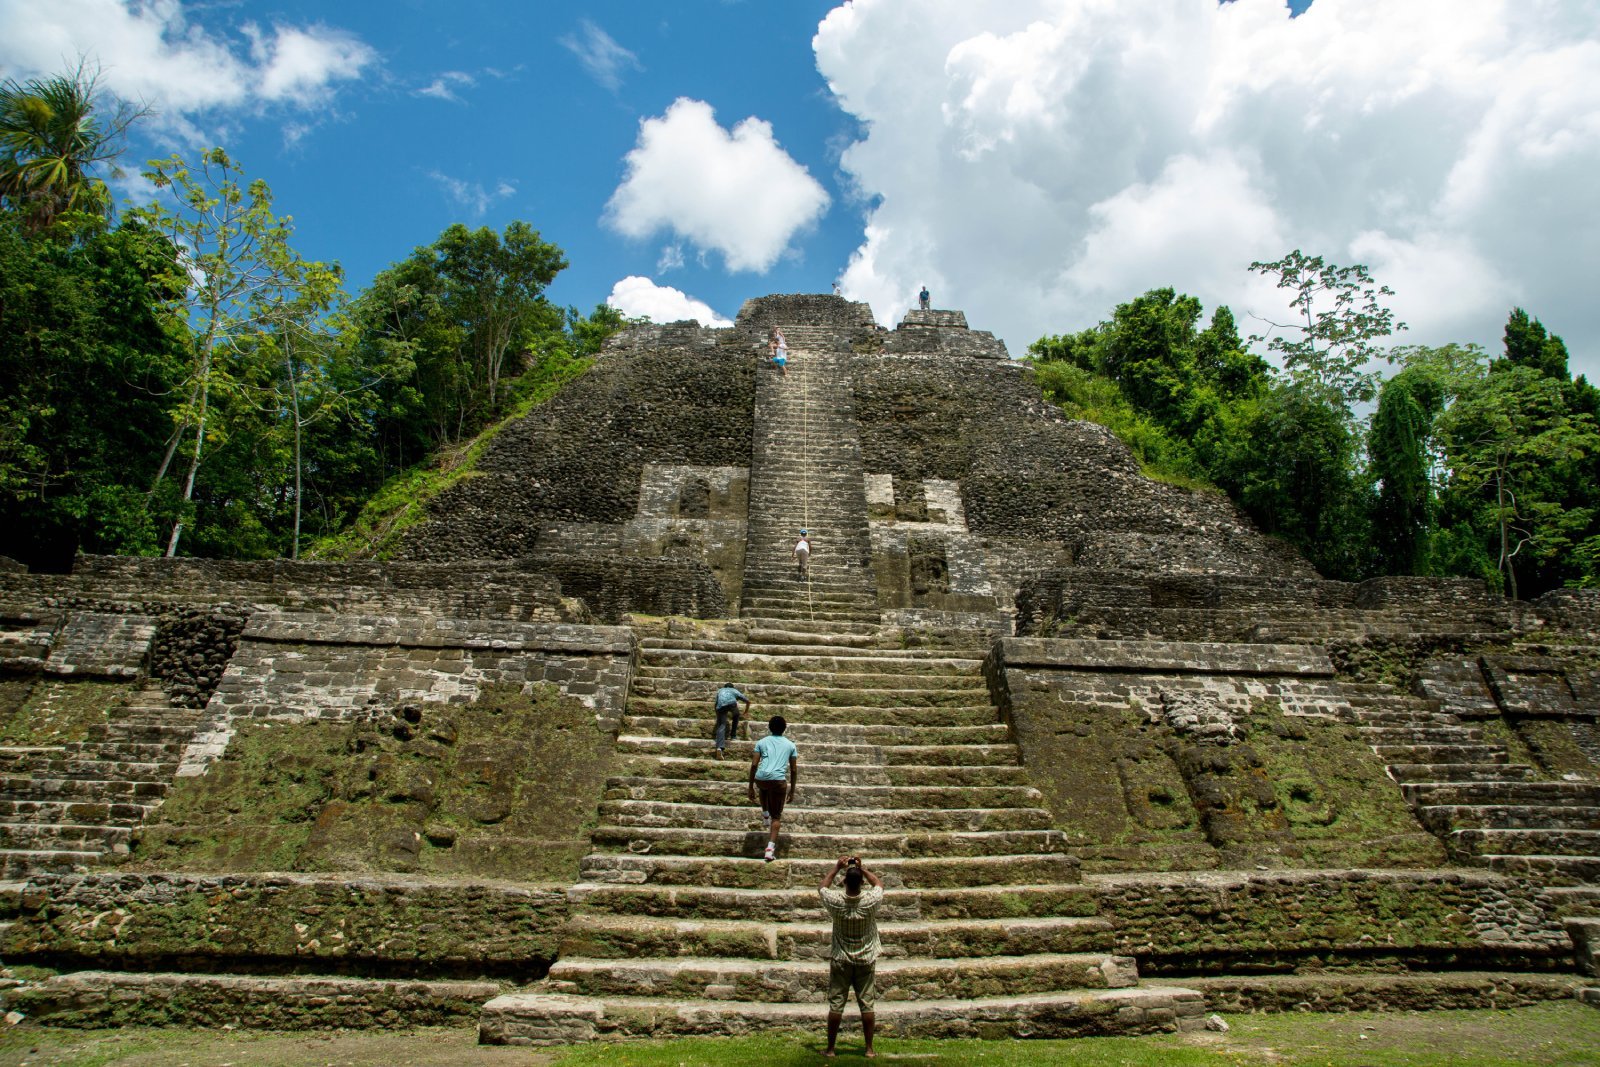 <p class="wp-caption-text">Image Credit: Shutterstock / Wata51</p>  <p><span>Lamanai, meaning “submerged crocodile” in the Maya language, is an archaeological site that sits on the banks of the New River Lagoon in northern Belize. Unlike many other Maya sites, Lamanai was occupied continuously for over 3,000 years, from the Preclassic period into the Colonial era. The site’s remote location, accessible only by a riverboat journey through dense rainforest, adds to its allure. Highlights include the Mask Temple, High Temple, and the Jaguar Temple, each adorned with impressive carvings and offering insights into the Maya’s complex society and cosmology.</span></p>